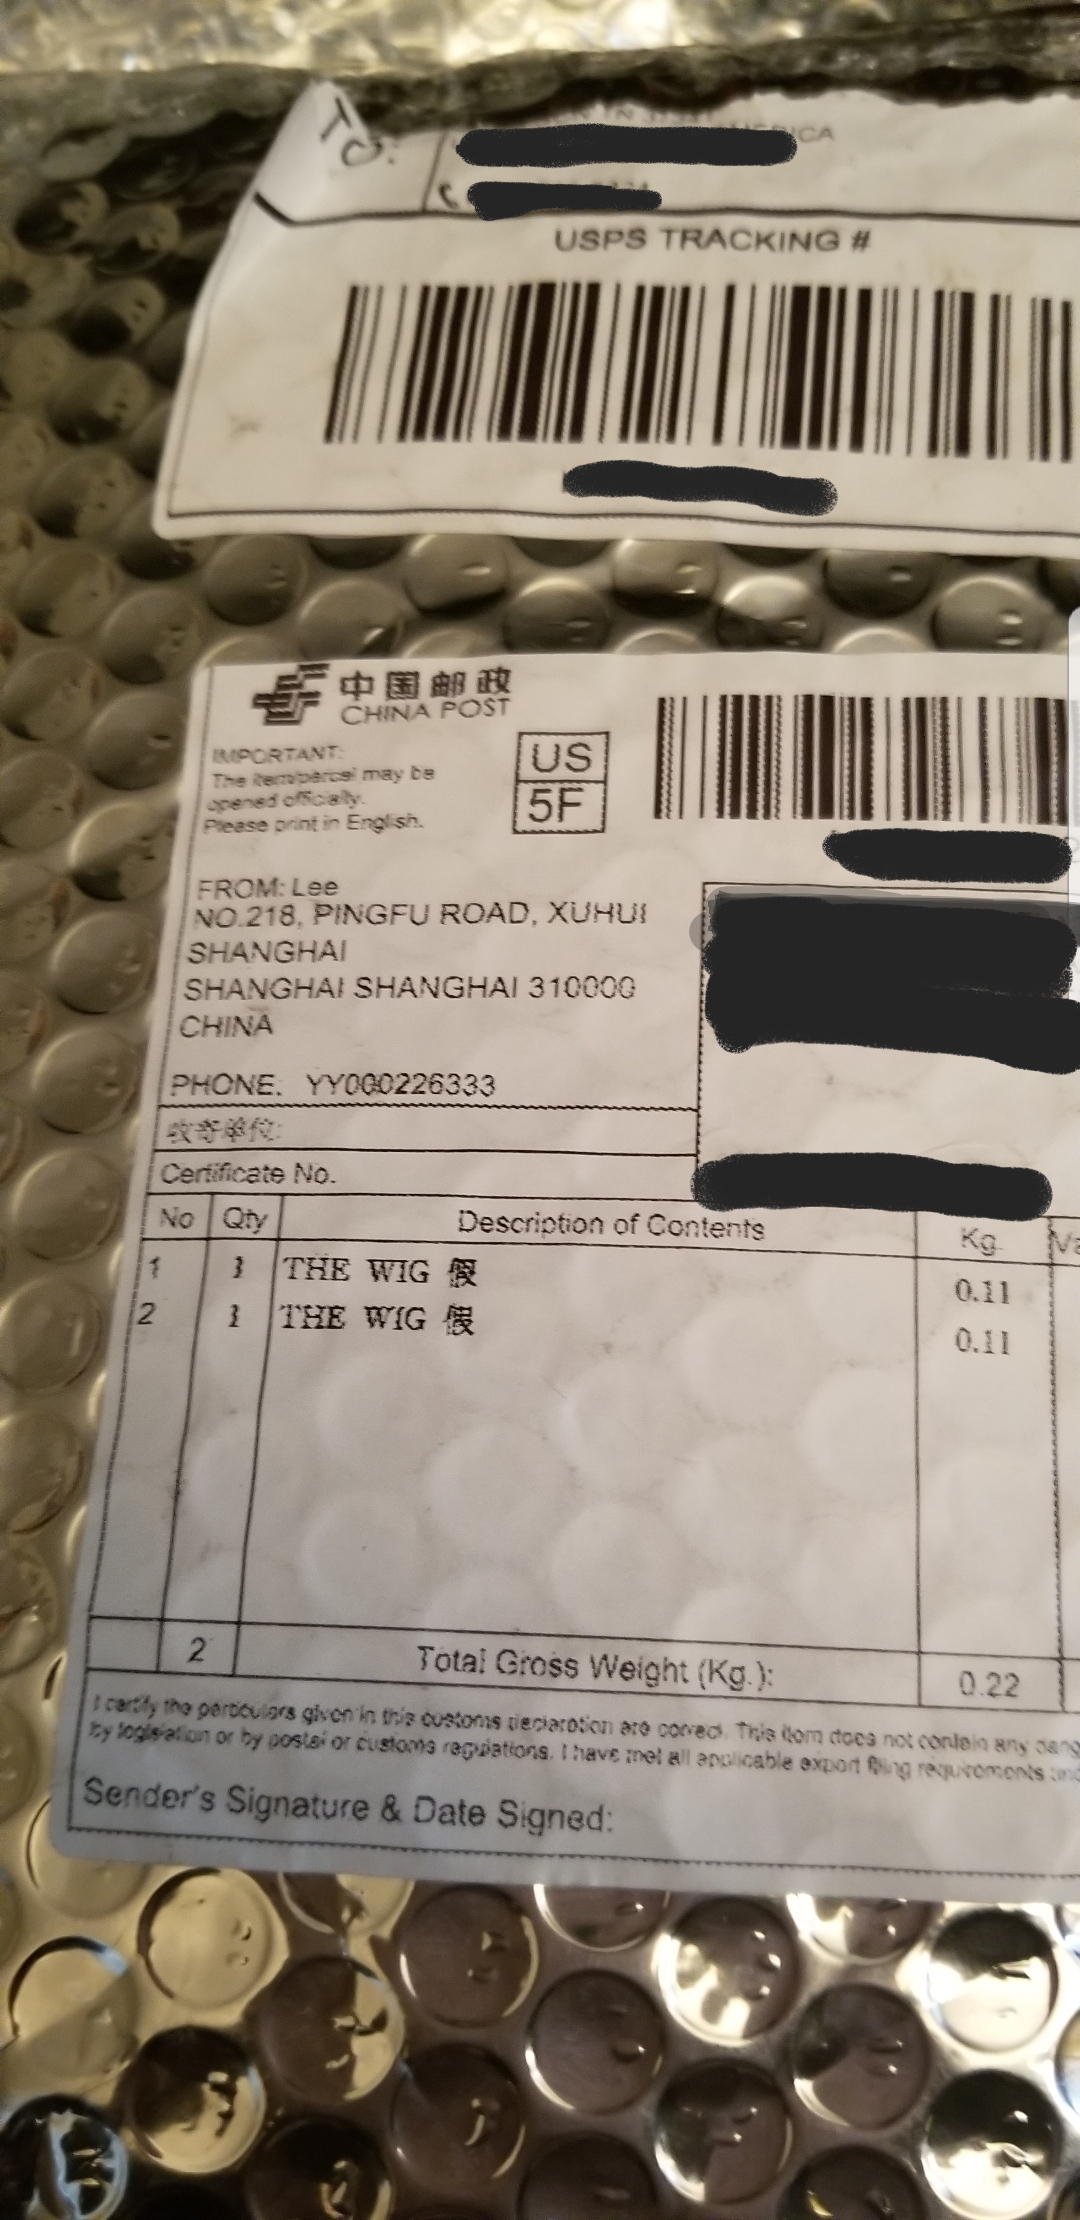 the package that it was sent in 